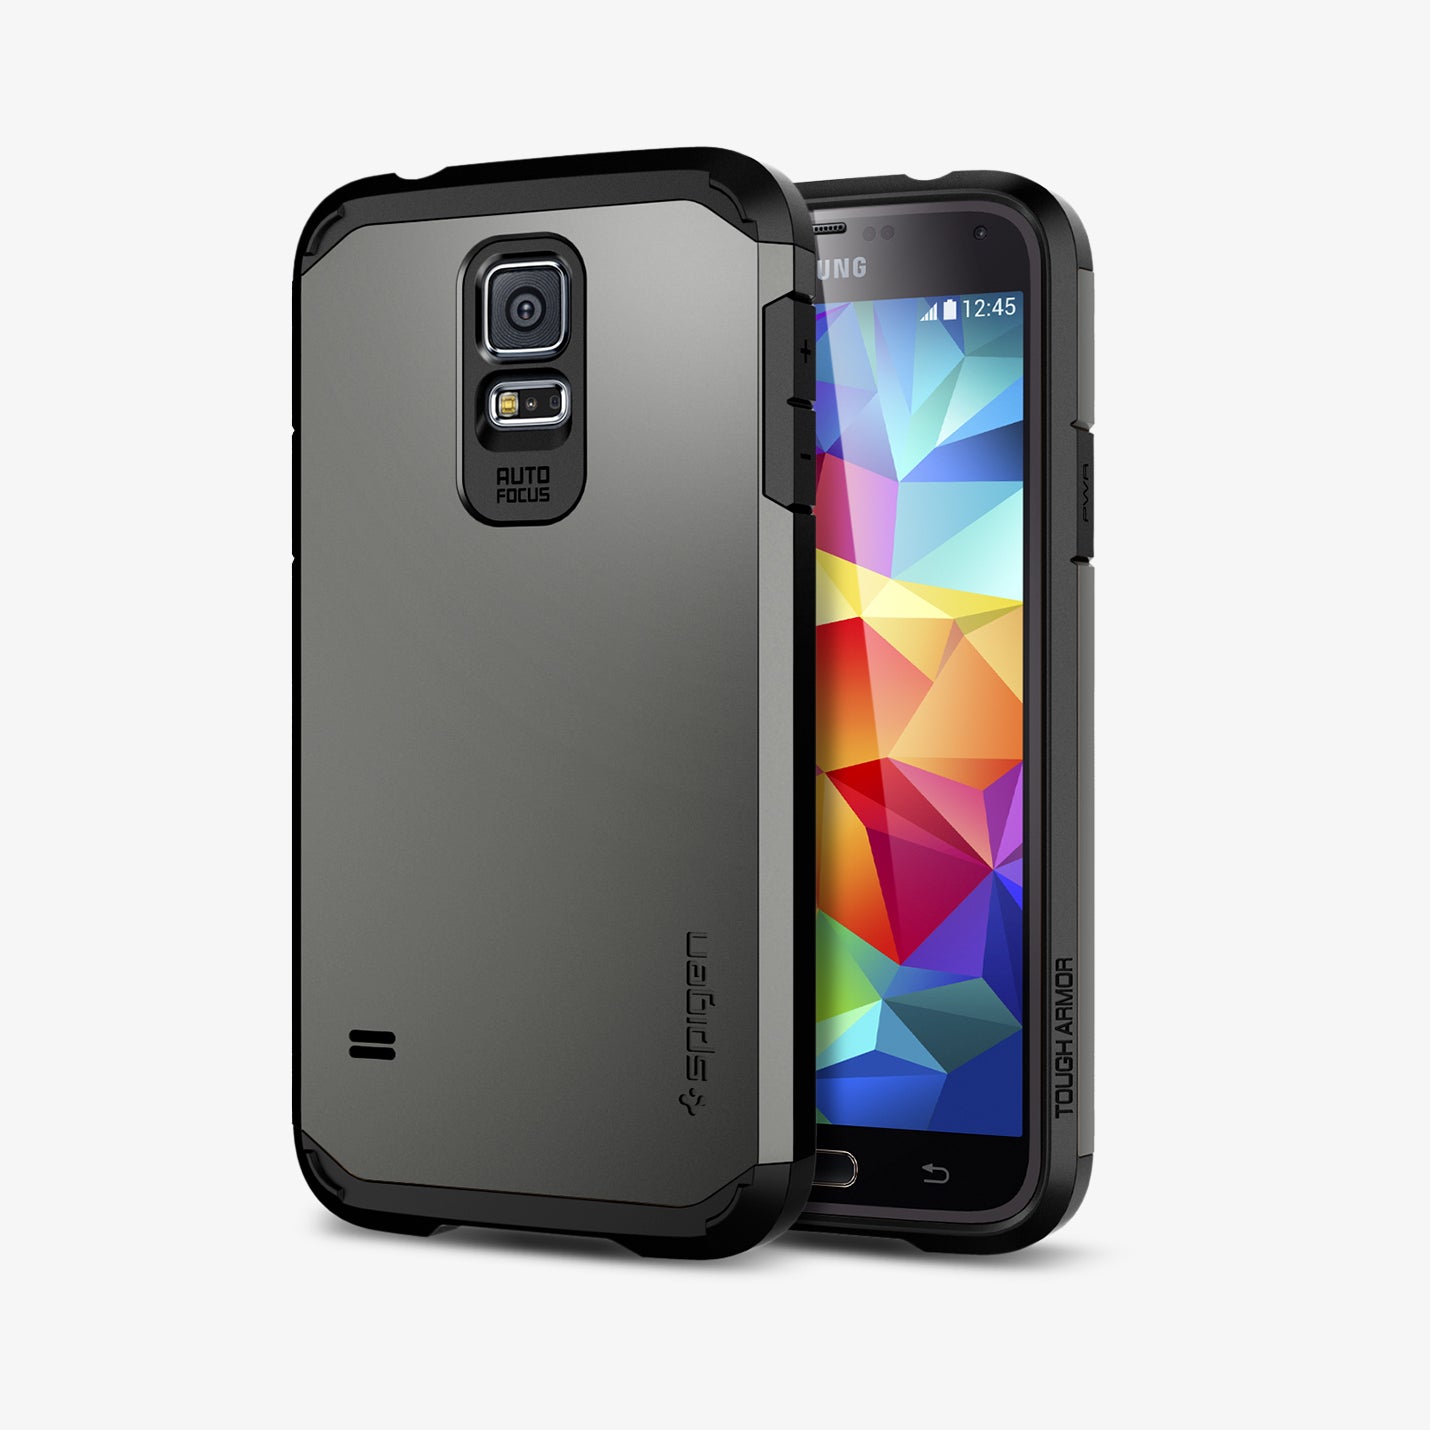 SGP10762 - Galaxy S5 Tough armor in gunmetal showing the front and the back